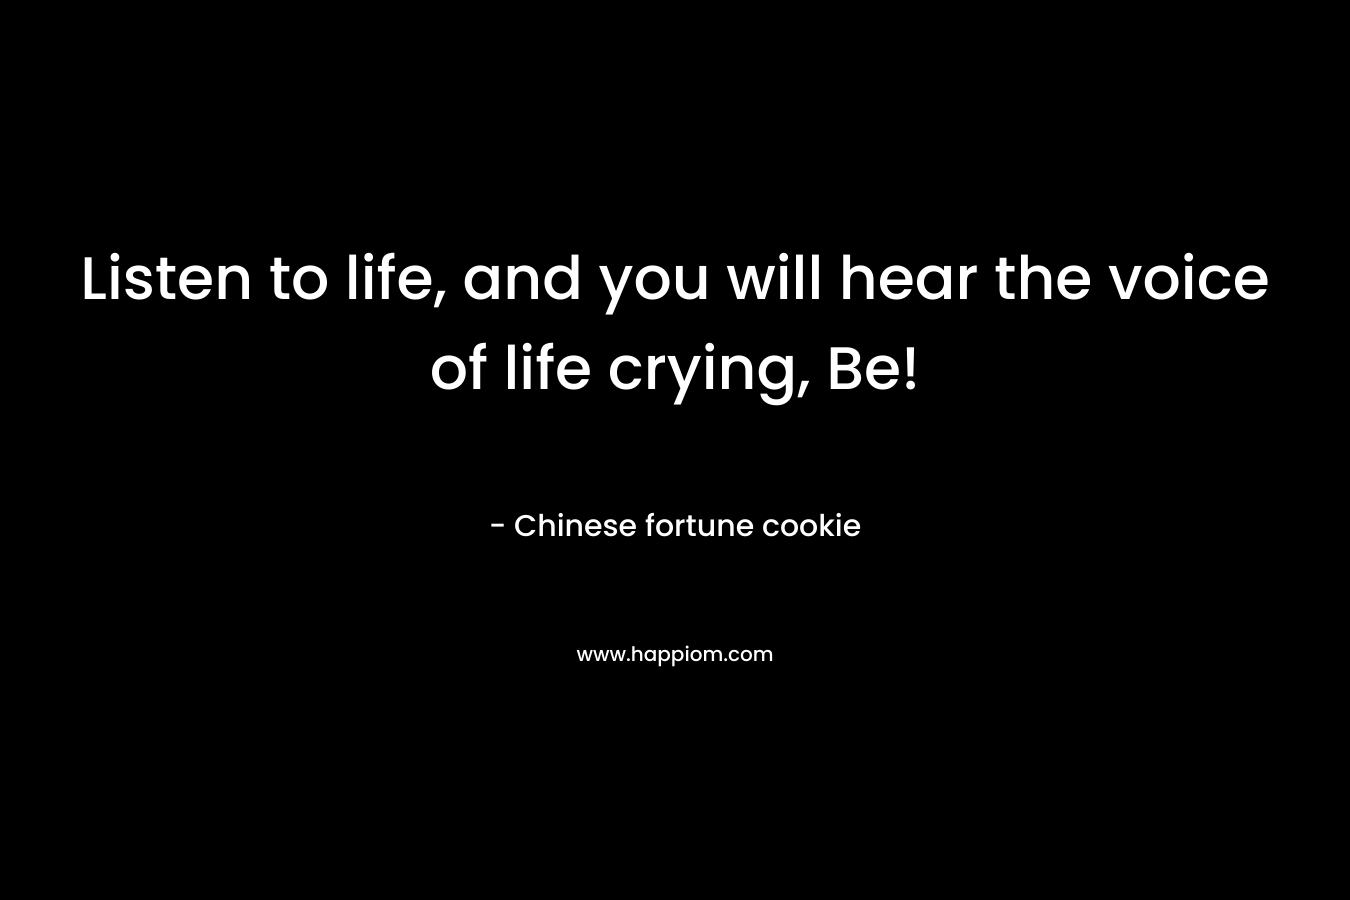 Listen to life, and you will hear the voice of life crying, Be! – Chinese fortune cookie